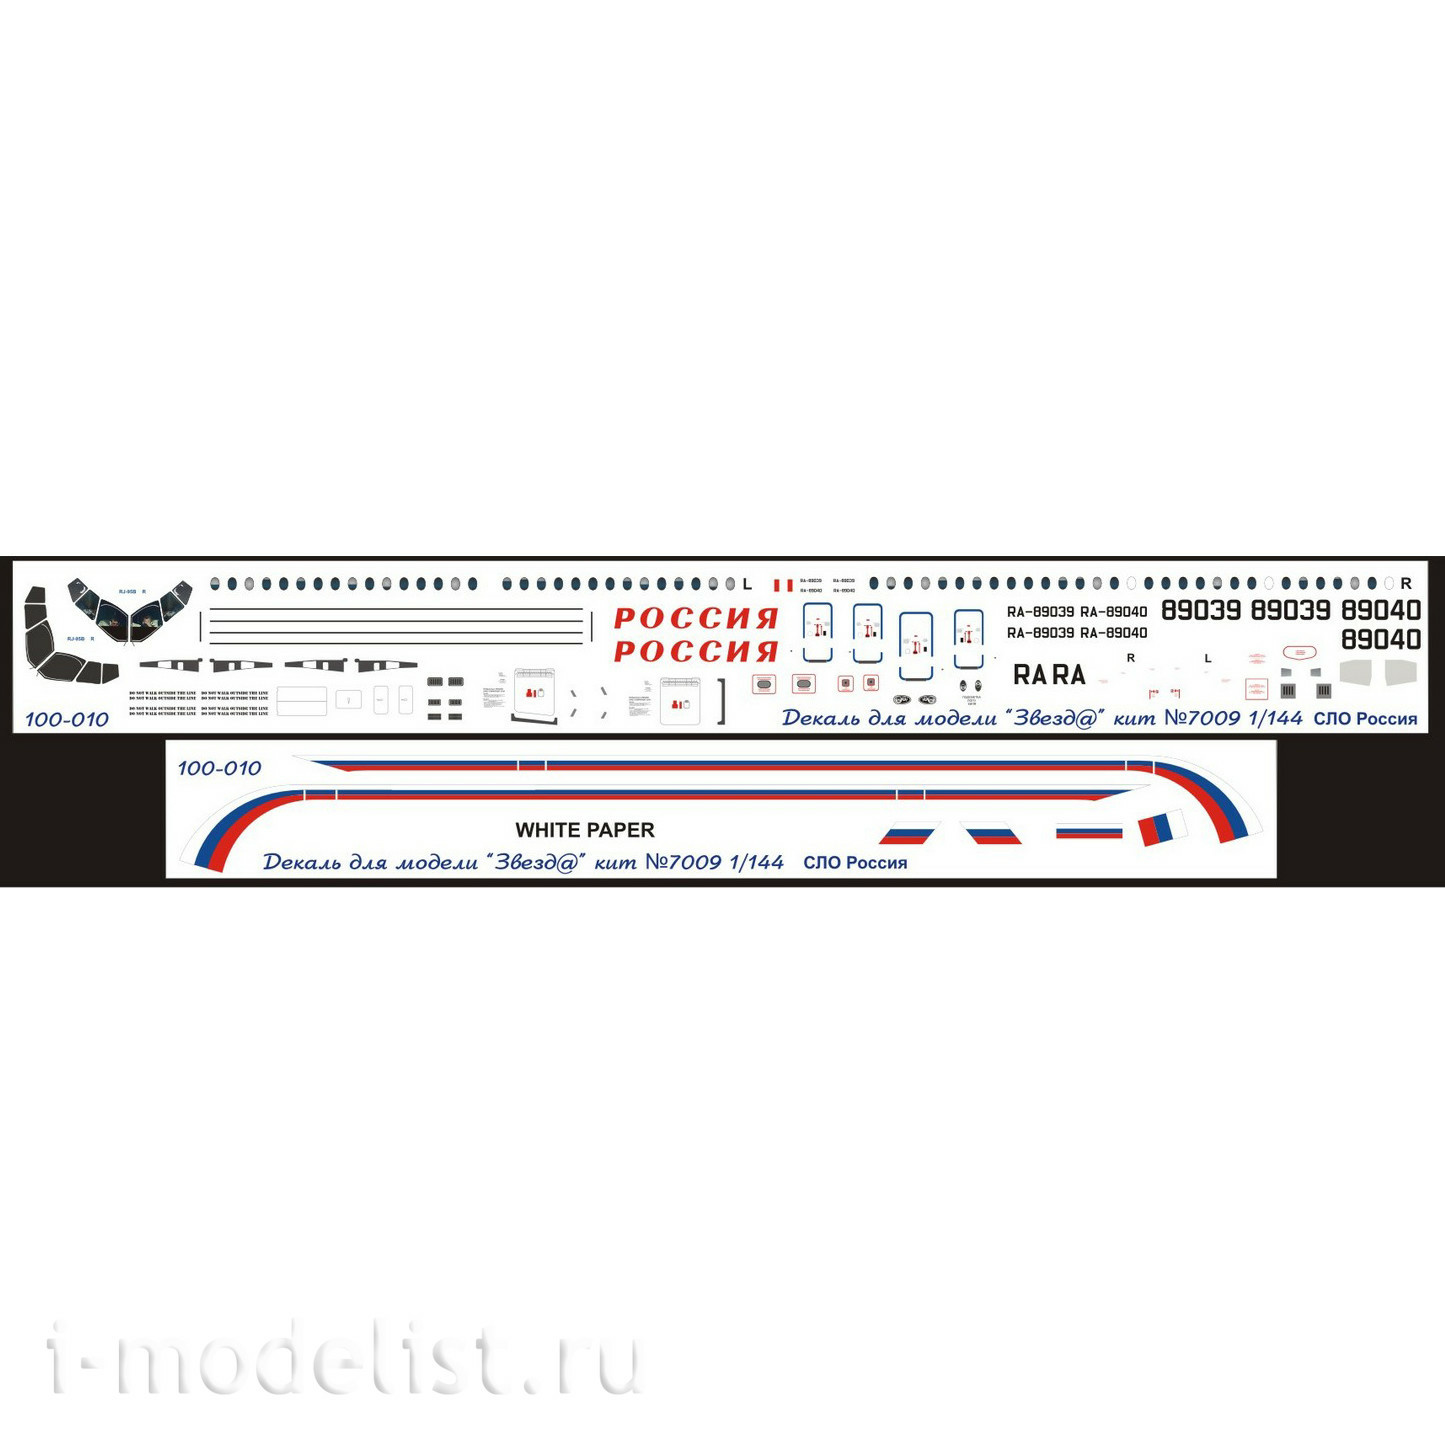 100-010 Ascensio 1/144 Decal for Suprjet 100, SLO Russia (RA-89040)